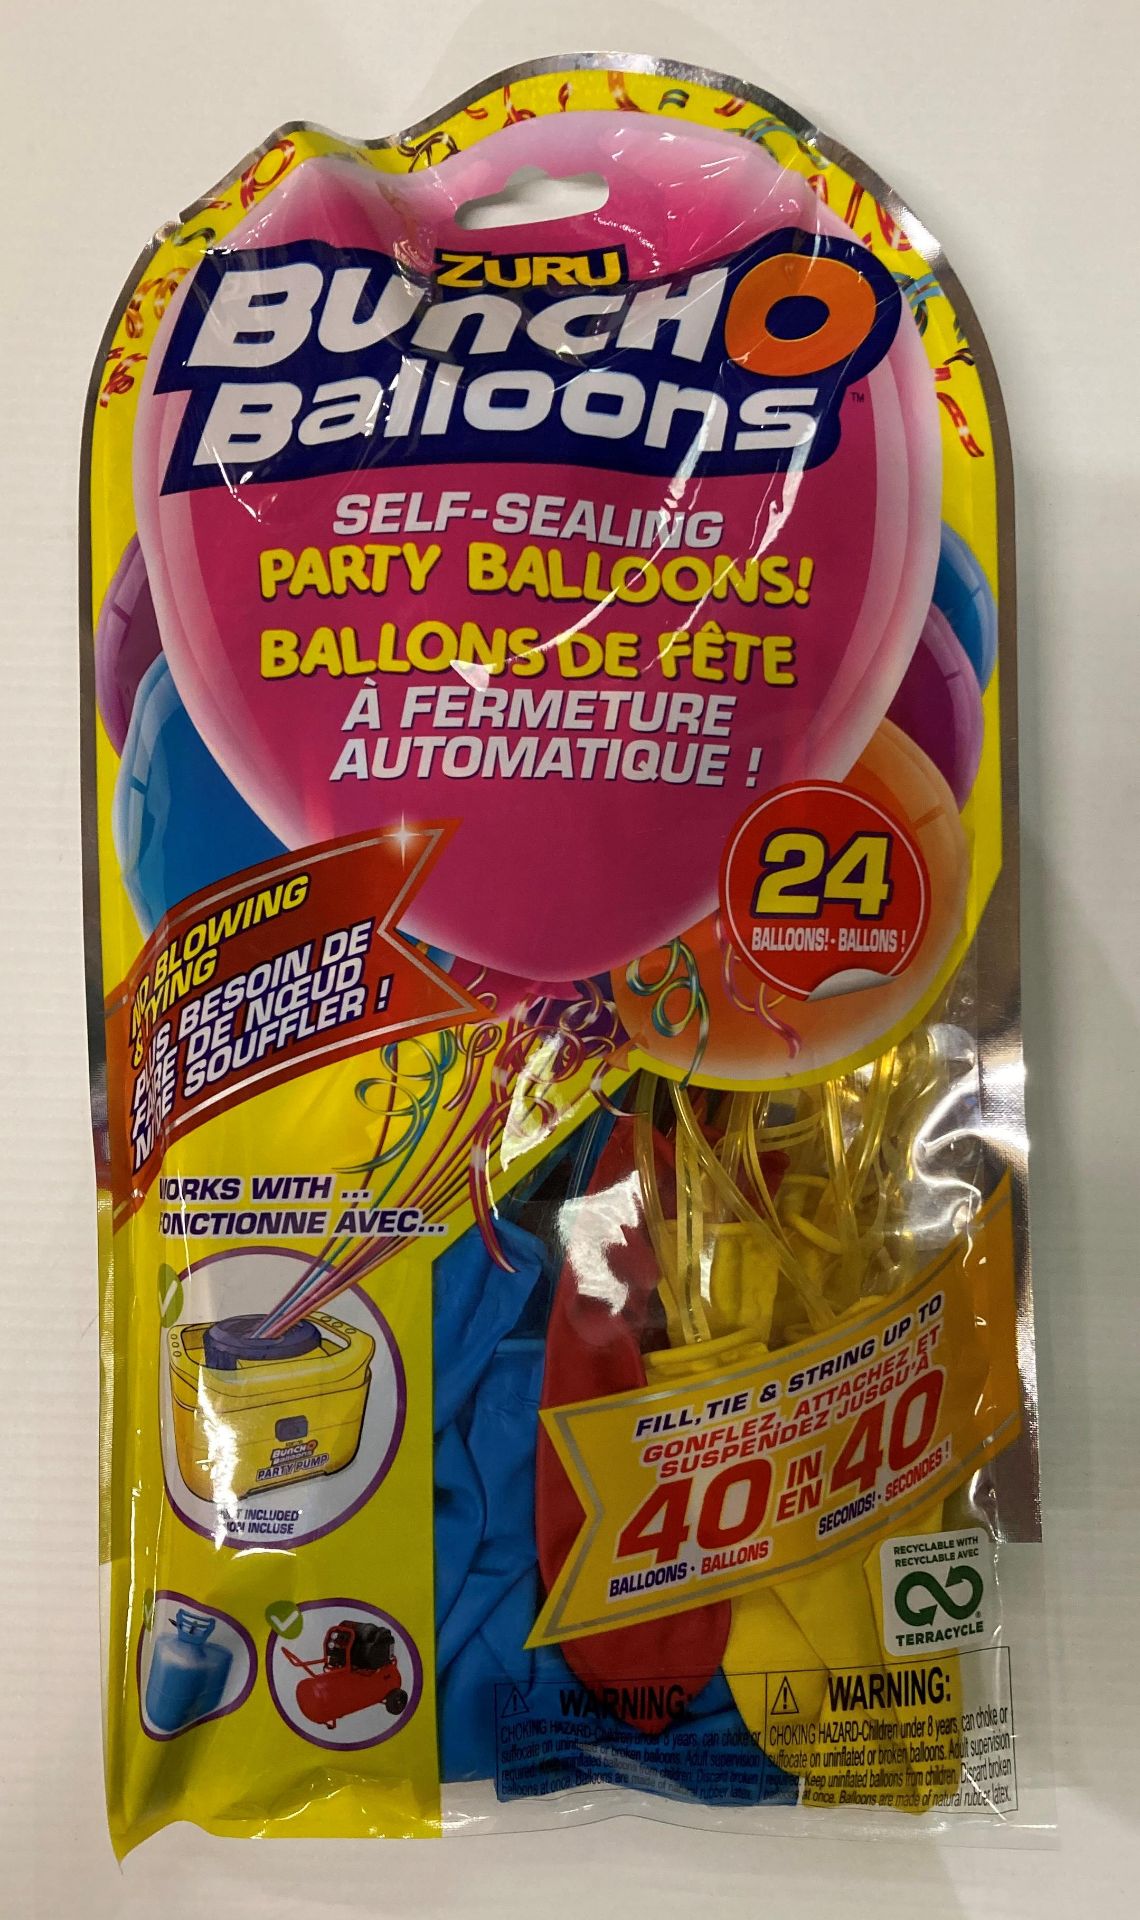 15 x packs of Zuru Bunch O Balloons - each pack contains 24 x self sealing balloons for use with